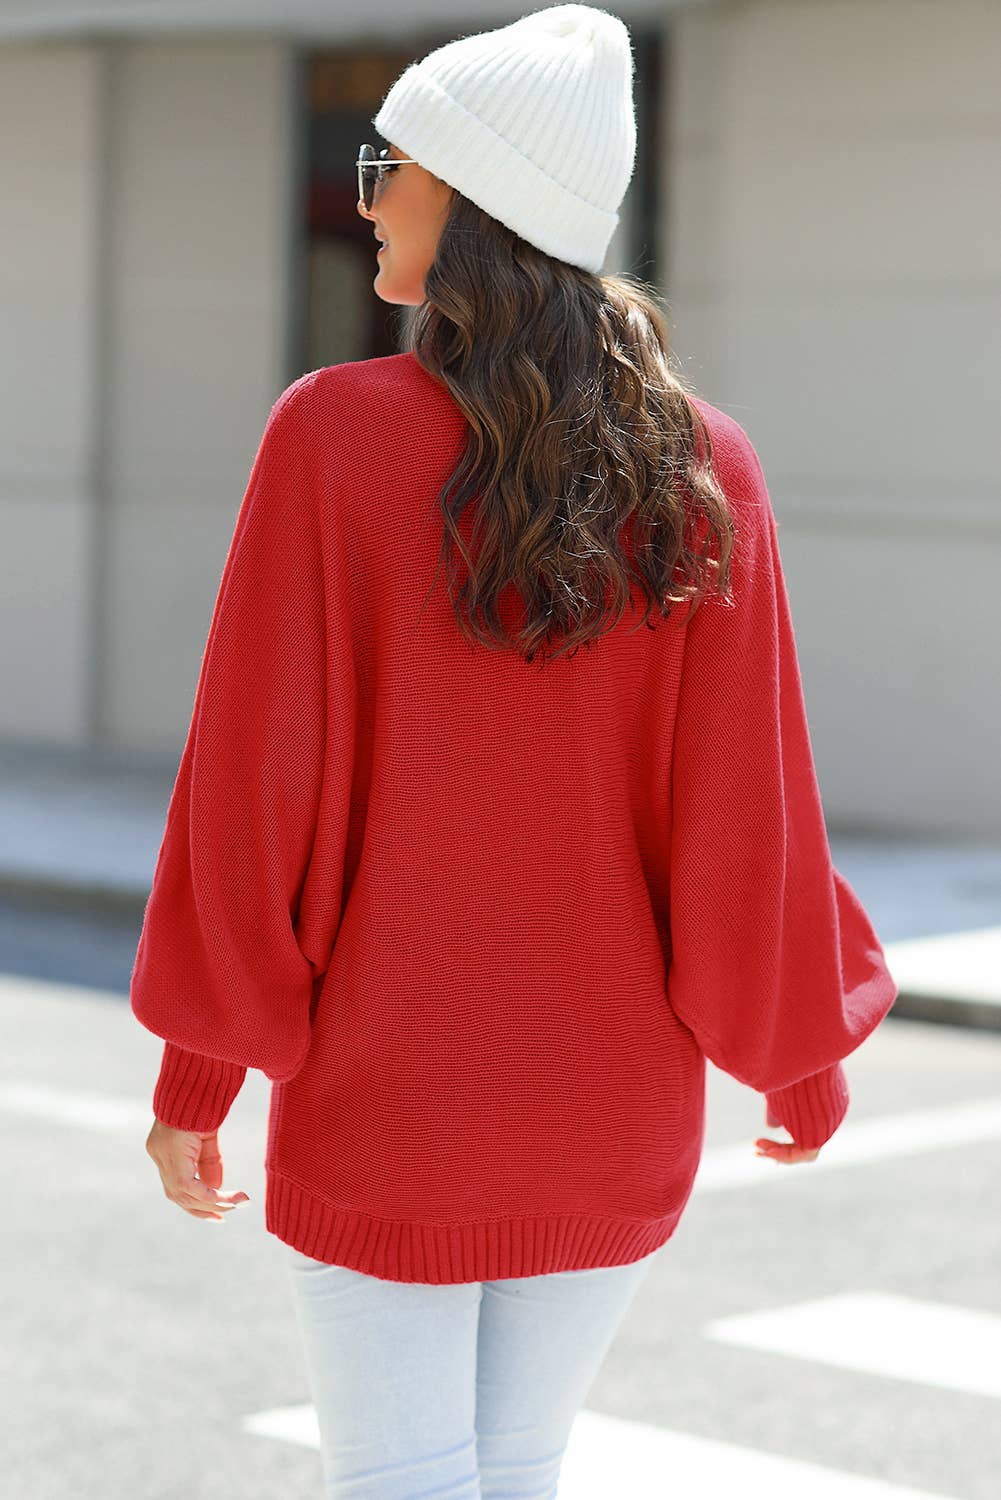 Merry Letter Embroidered Red High Neck Sweater